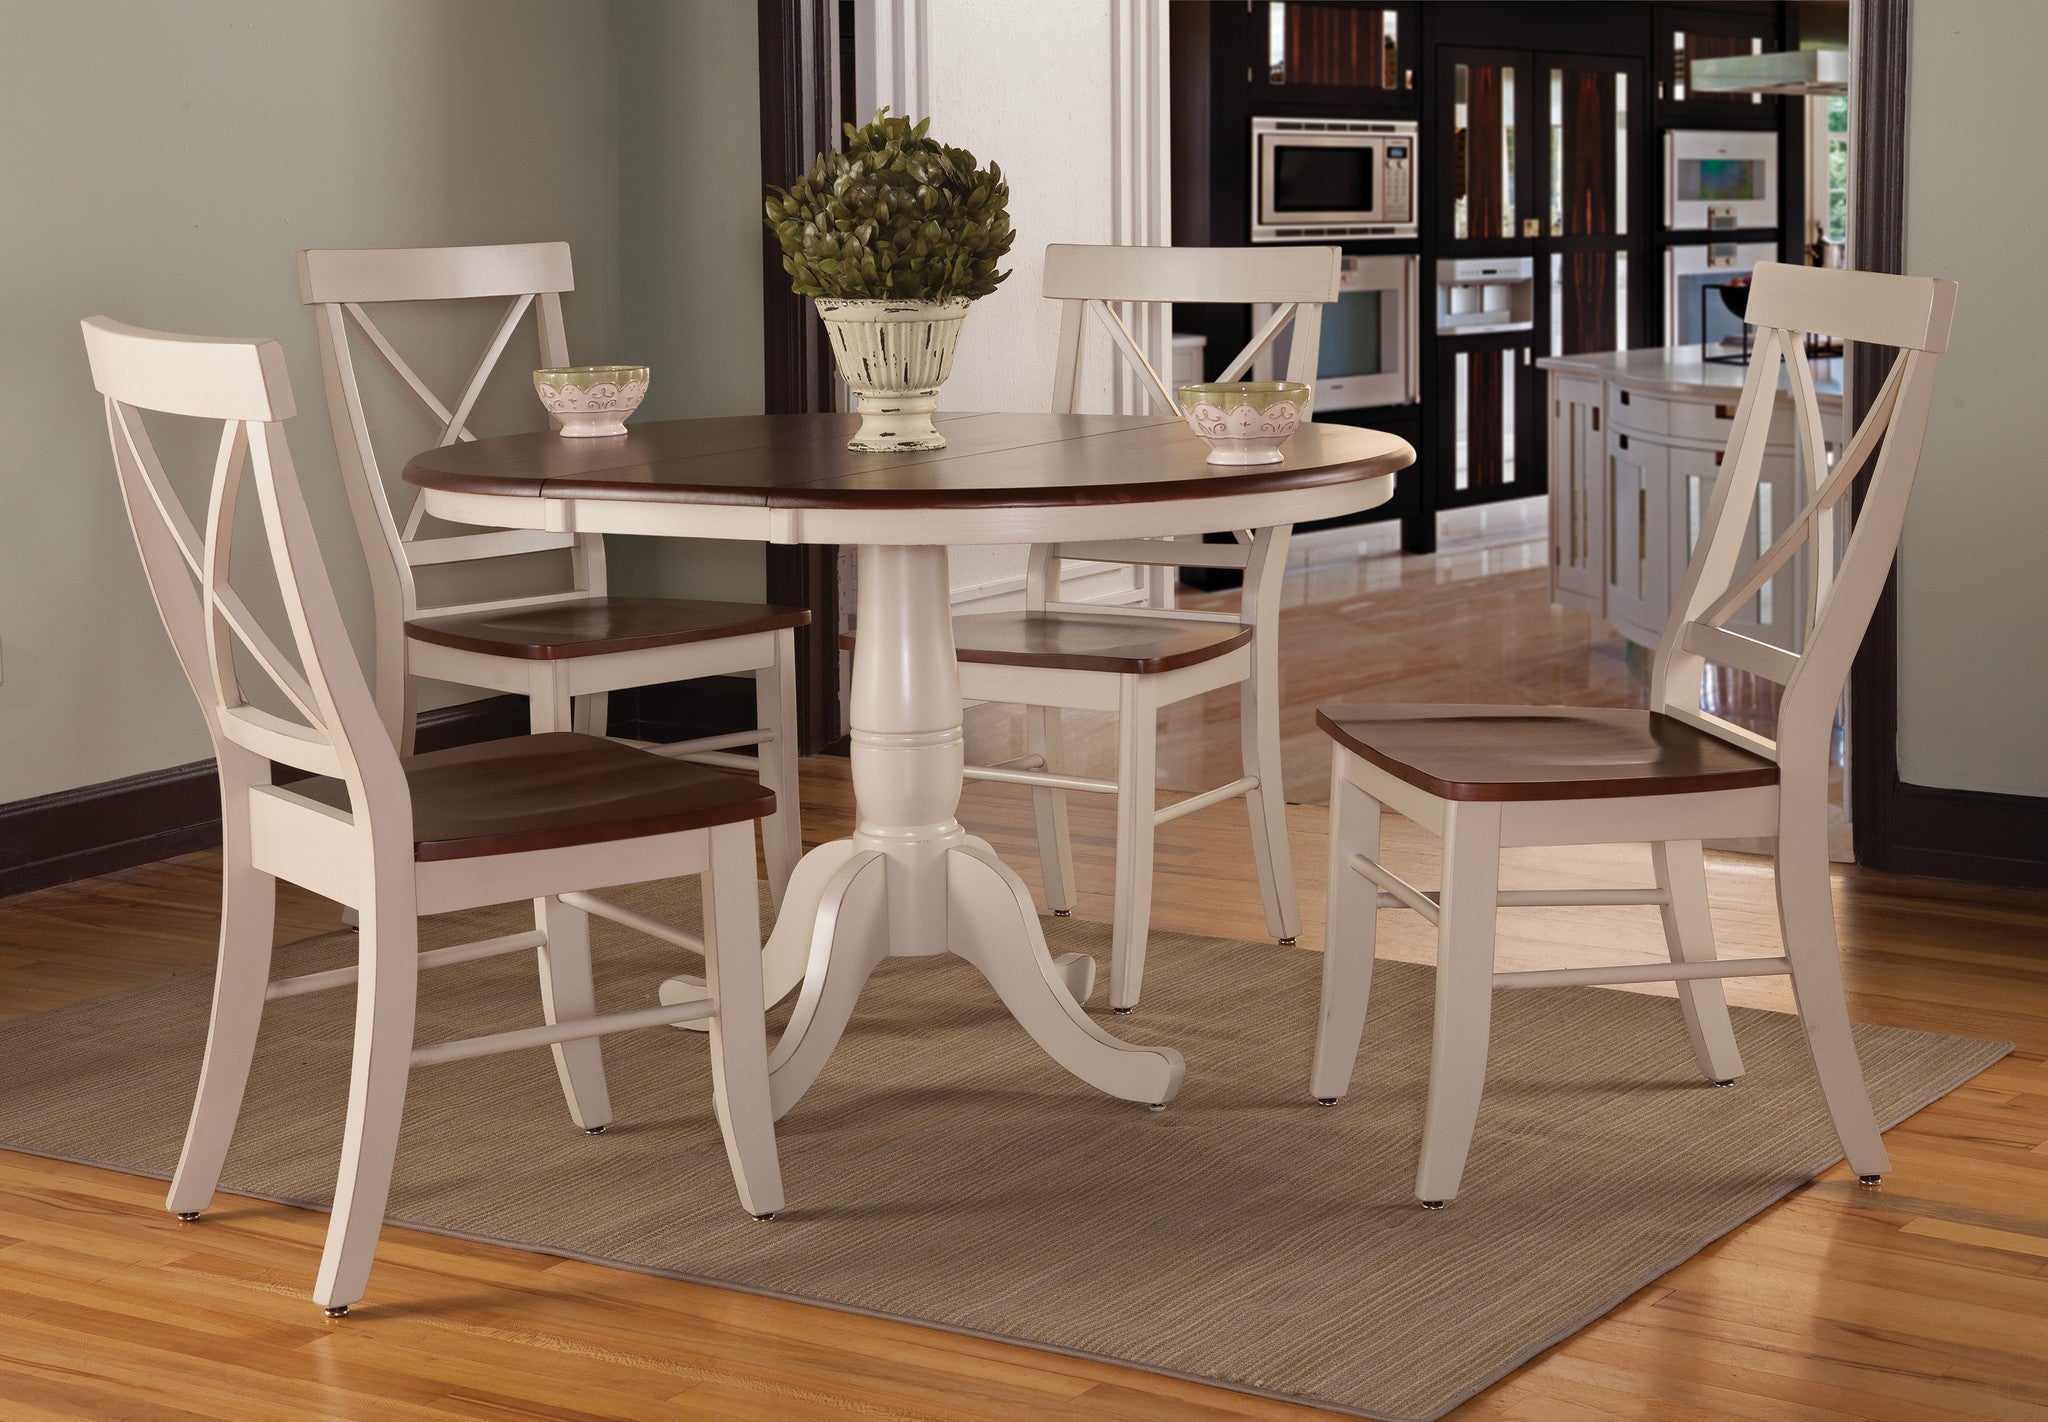 36 Round Dining Room Table With Leaf